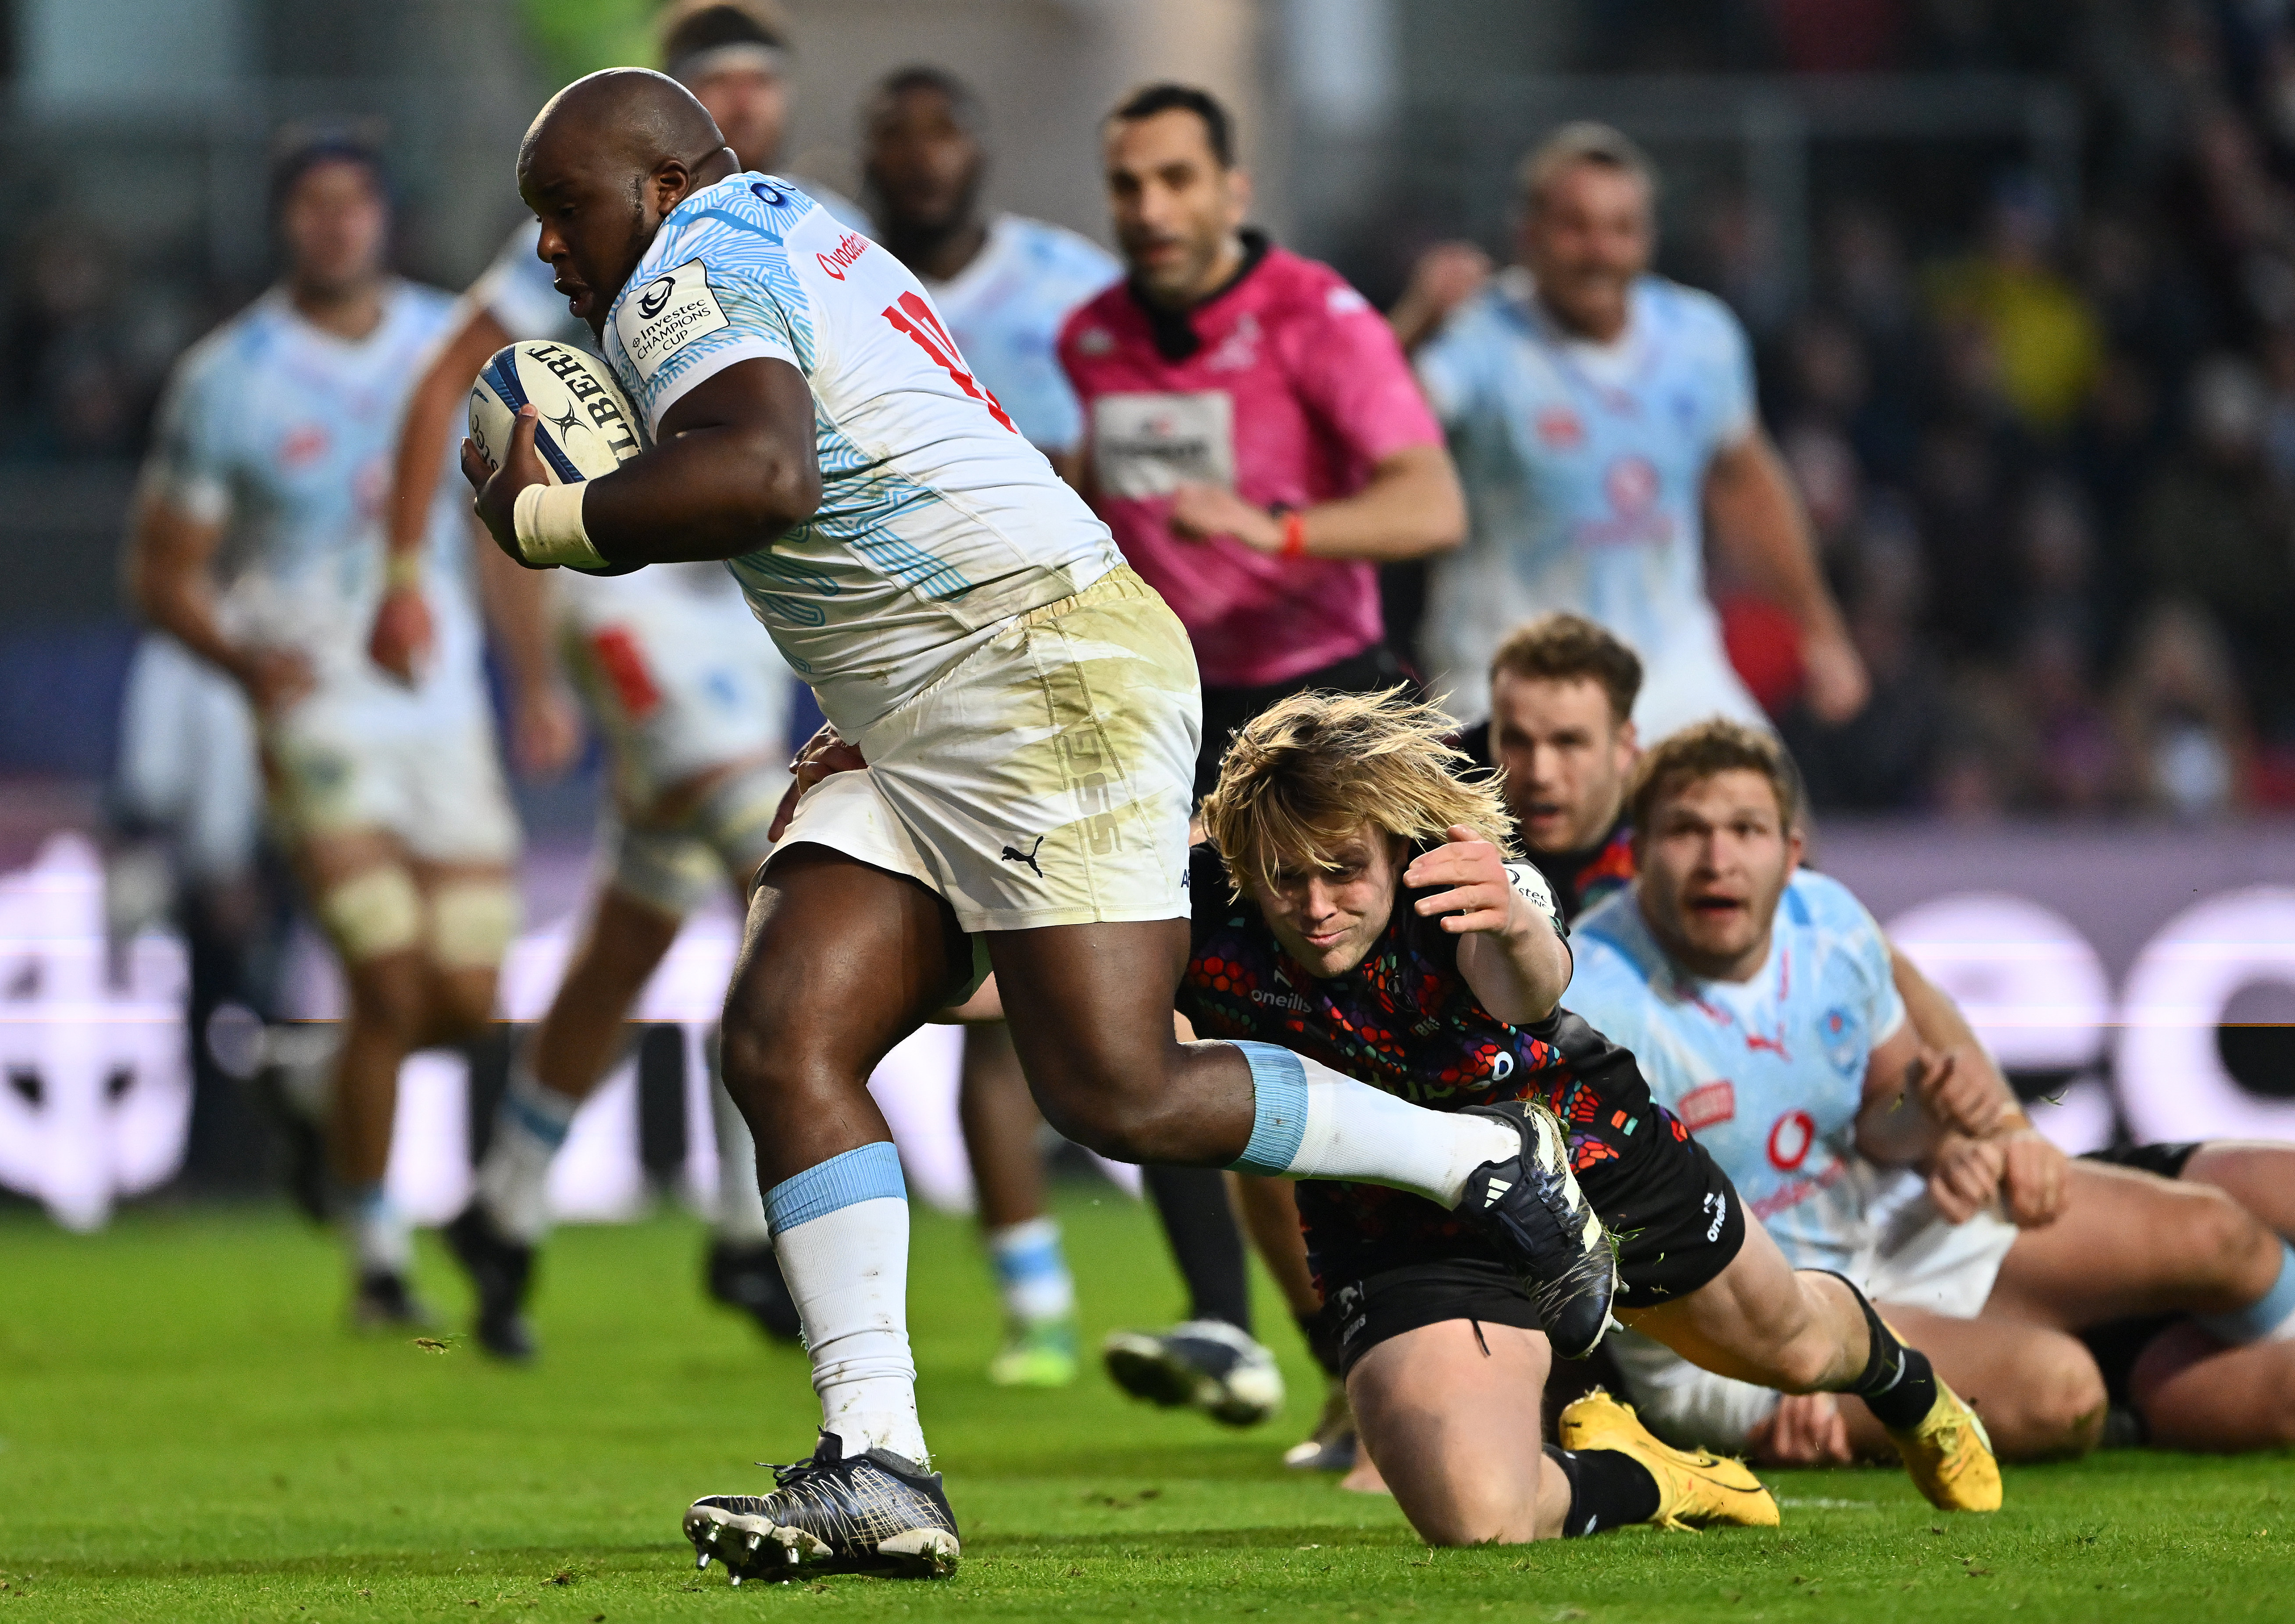 Pesky Saffas are in European club rugby to stay, despite grumbles from the North